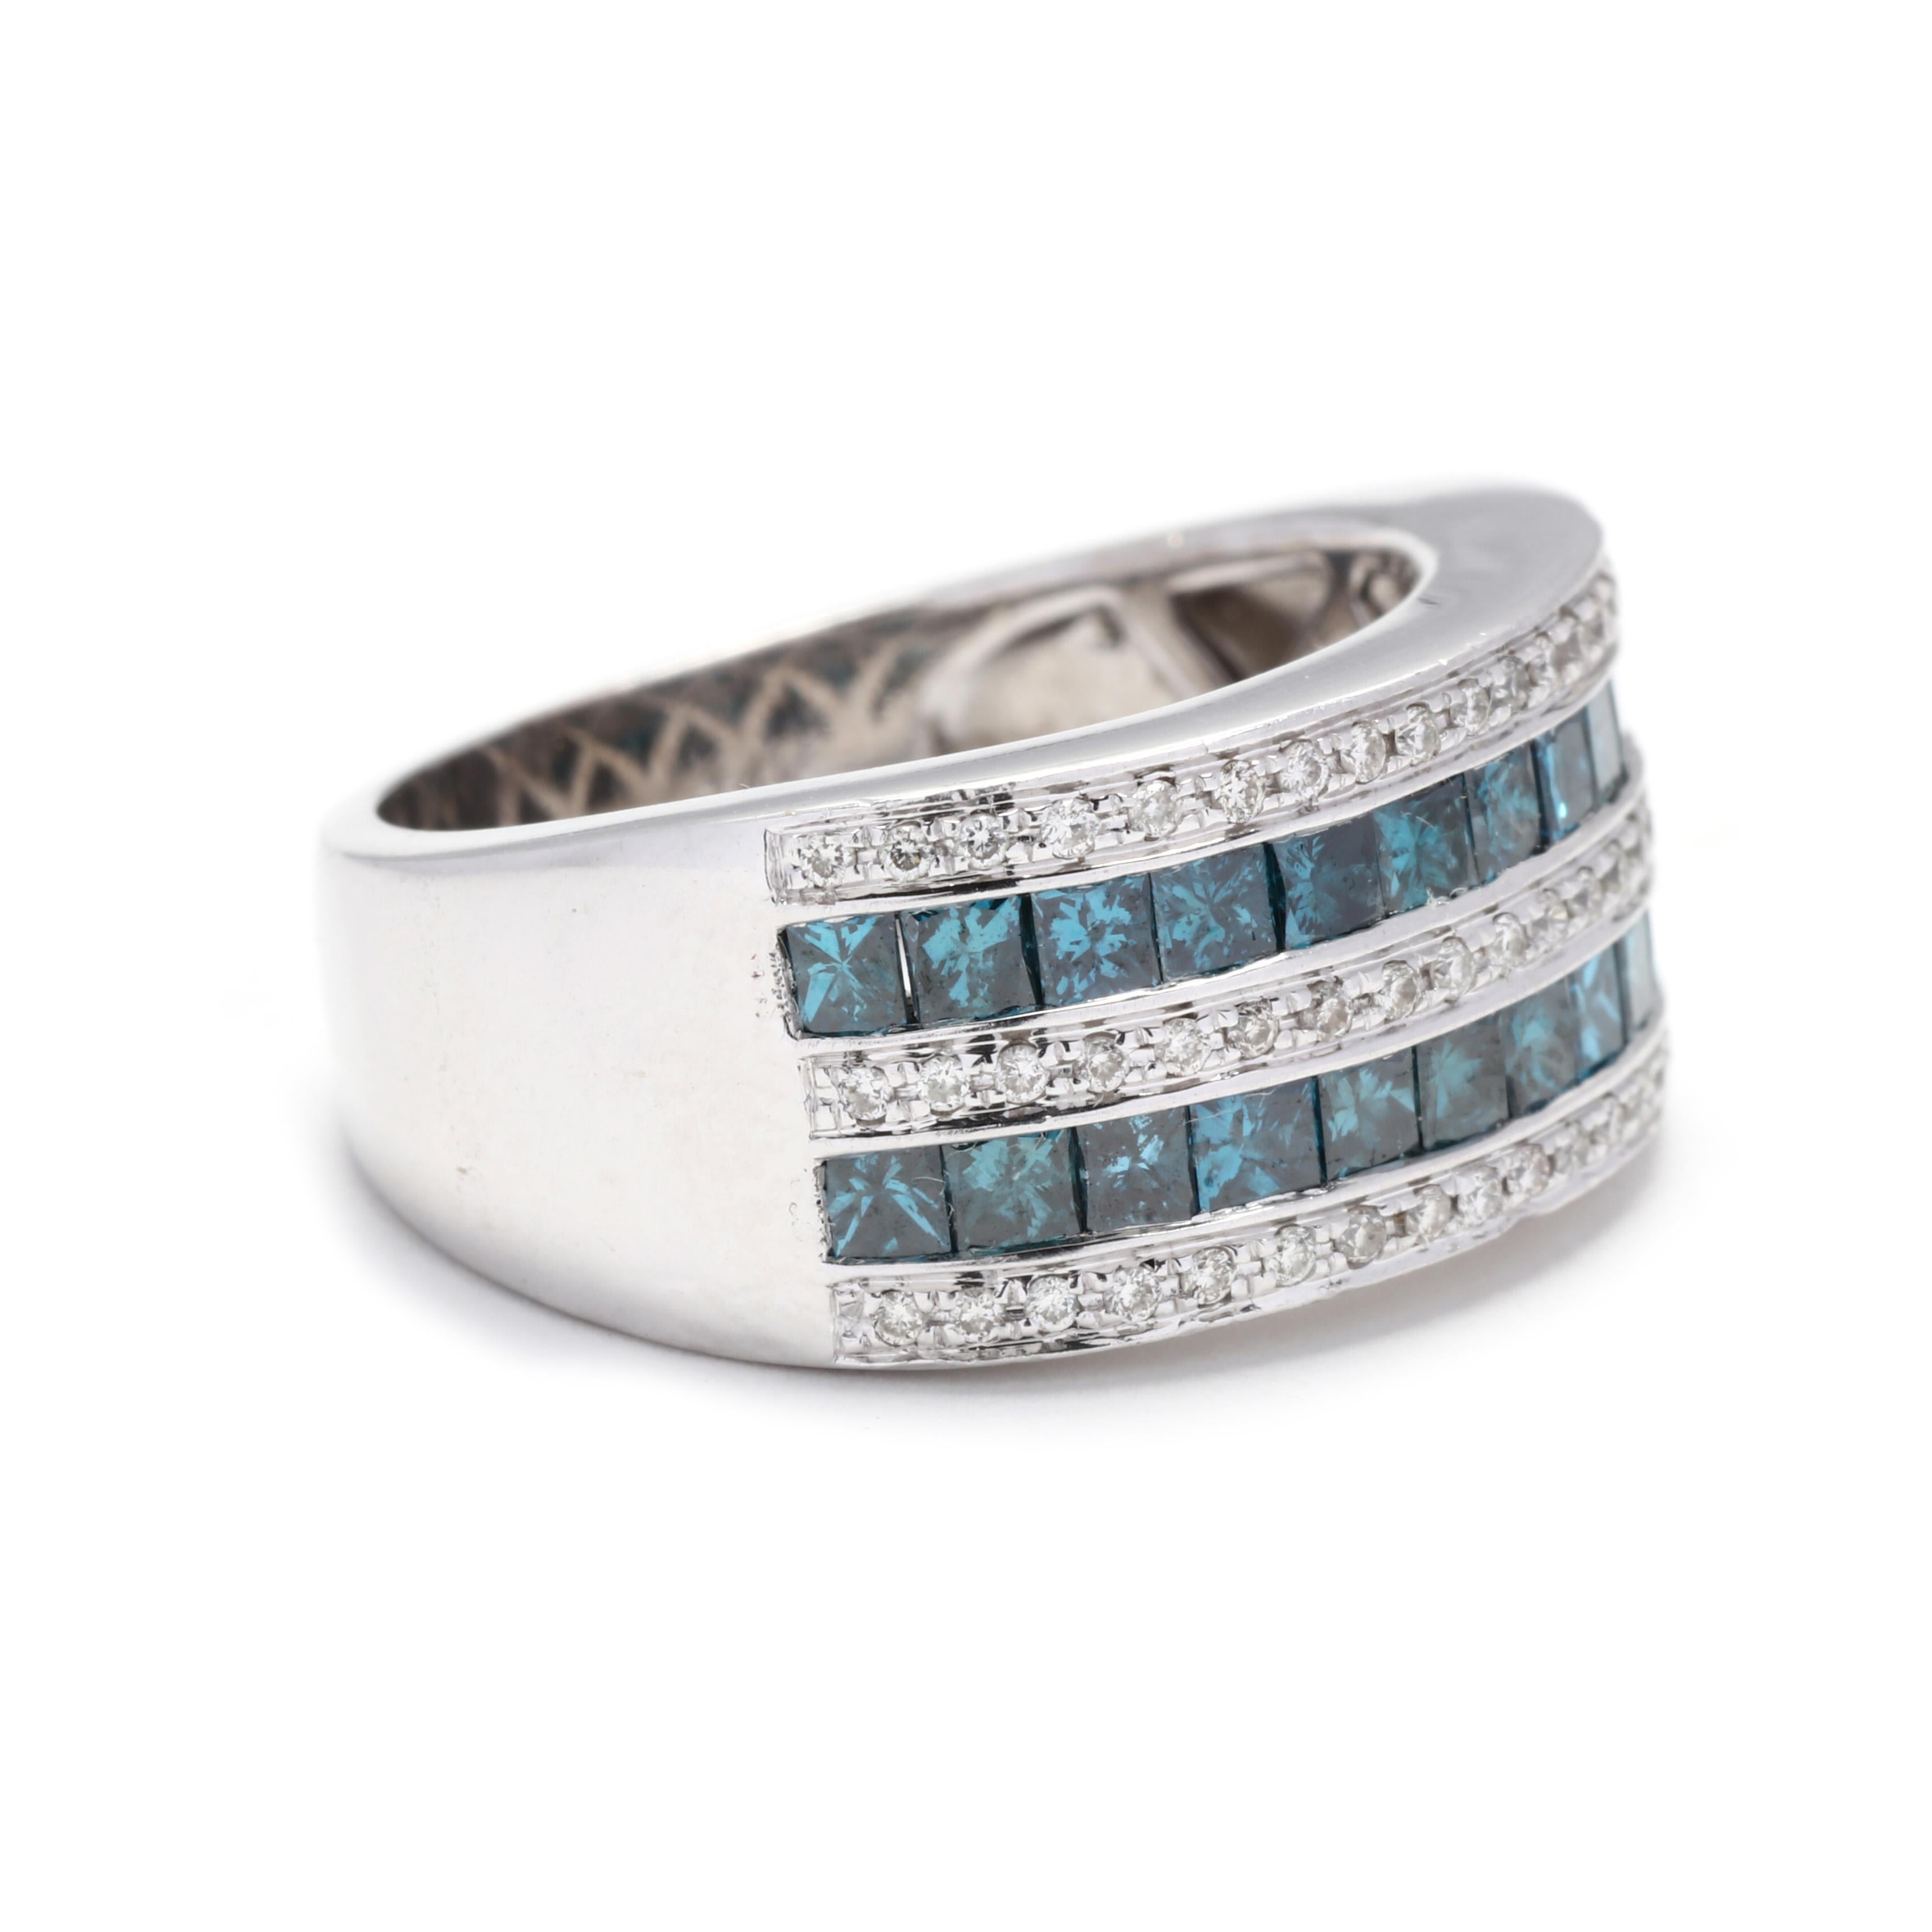 A 14 karat white gold blue and white diamond wide band ring. This band features two rows of channel set princess cut blue diamonds weighing approximately 1.44 total carats with a row of full cut white diamonds down the center and on either side with